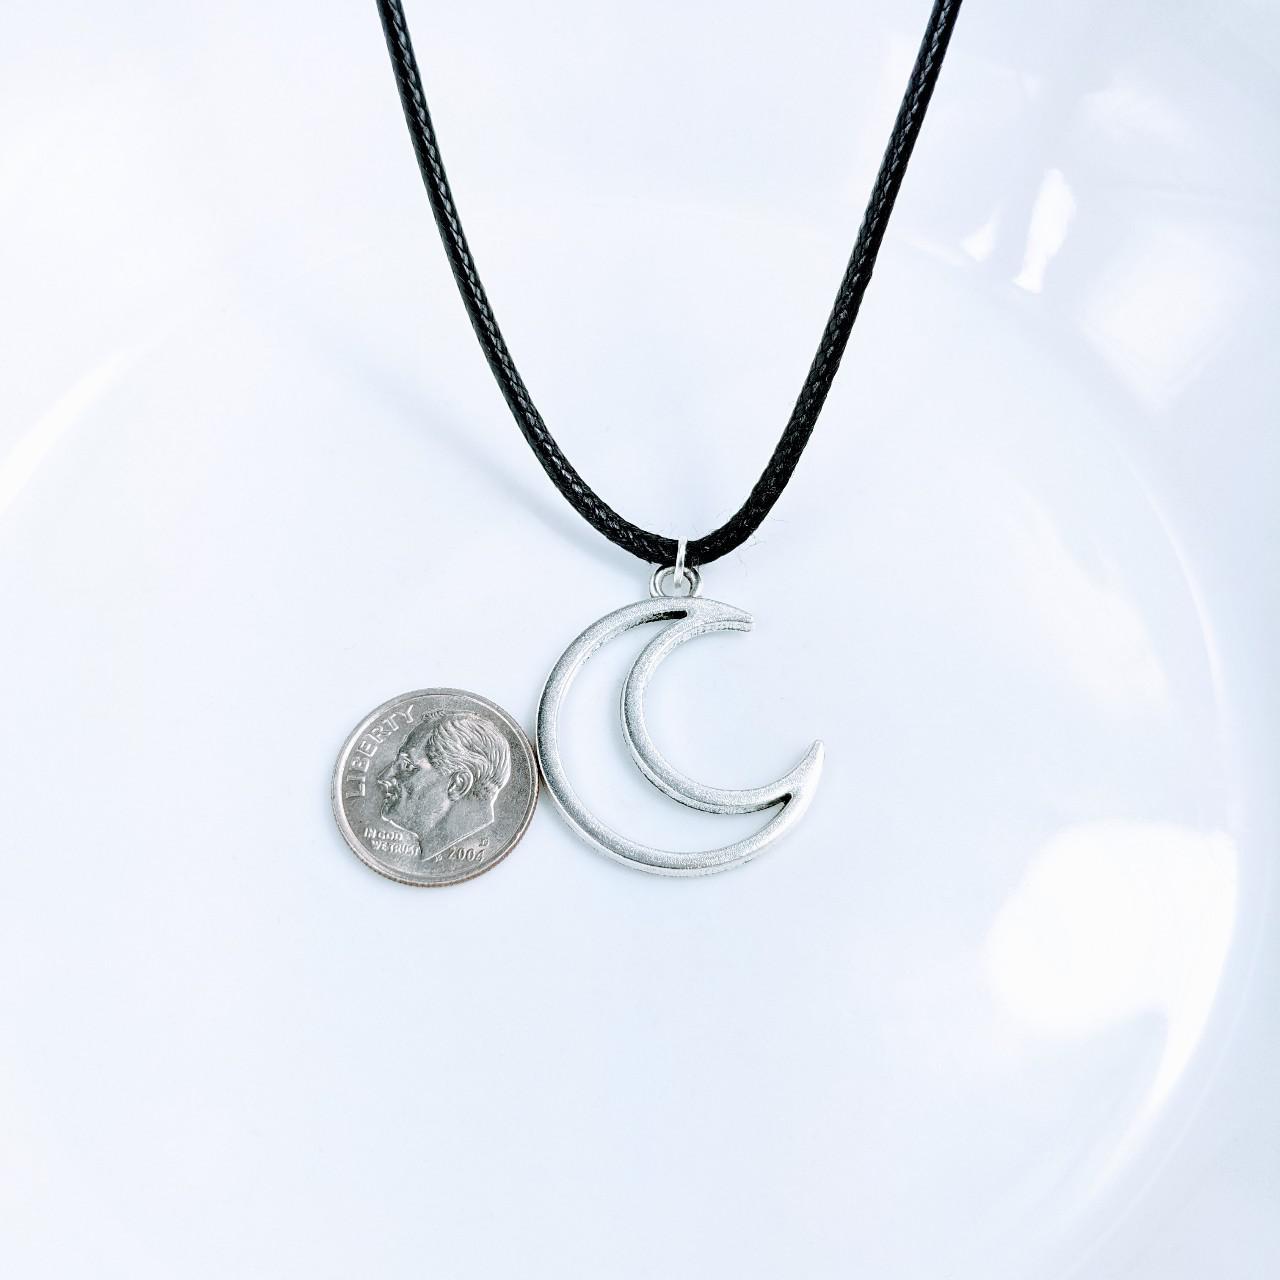 Product Image 3 - Silver Tone Crescent Moon Necklace
Brand